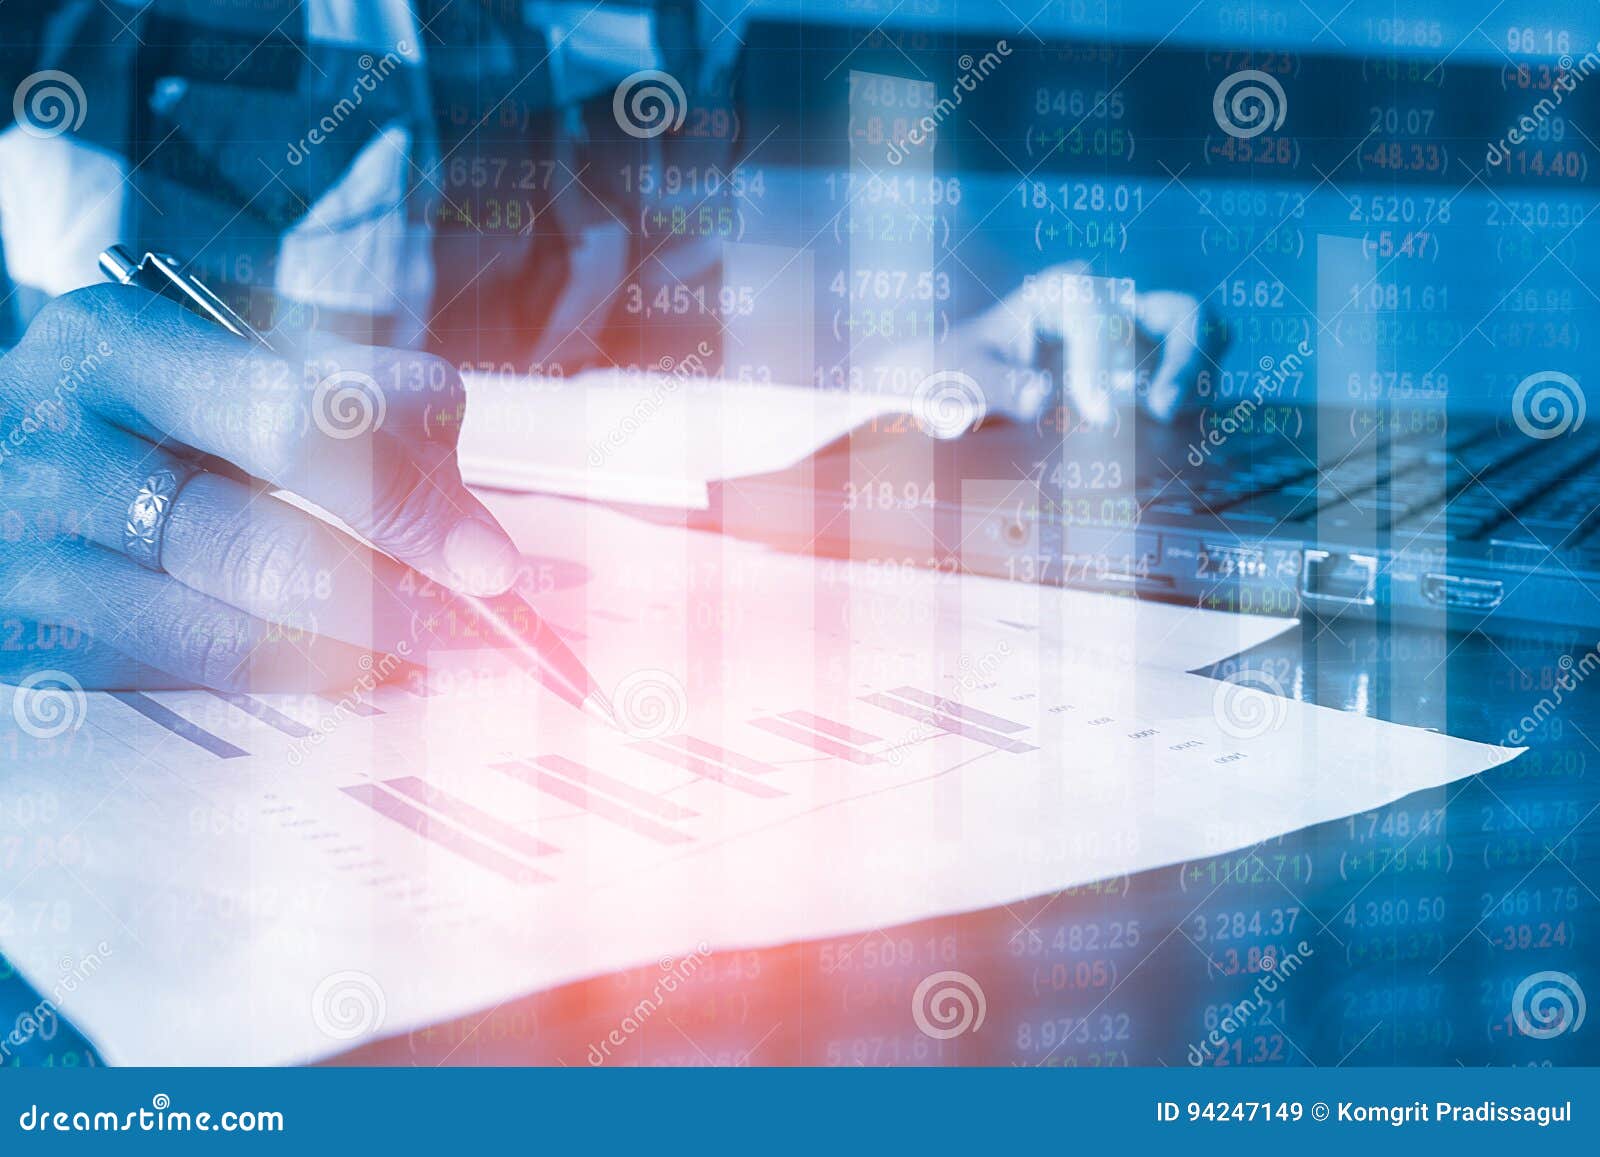 double exposure business people analysis financial accounting